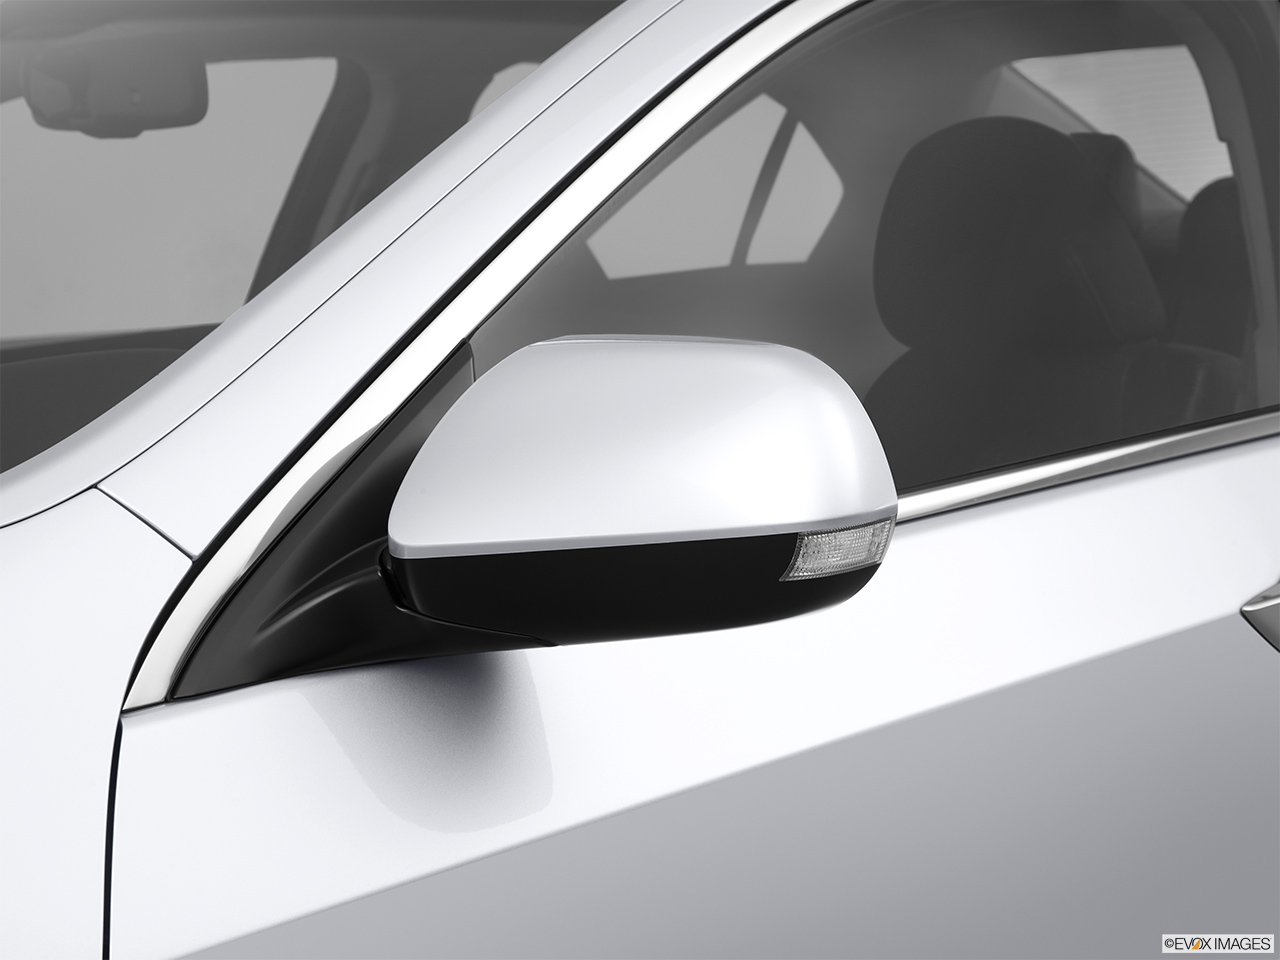 2013 Acura TSX 5-speed Automatic Driver's side mirror, 3_4 rear 